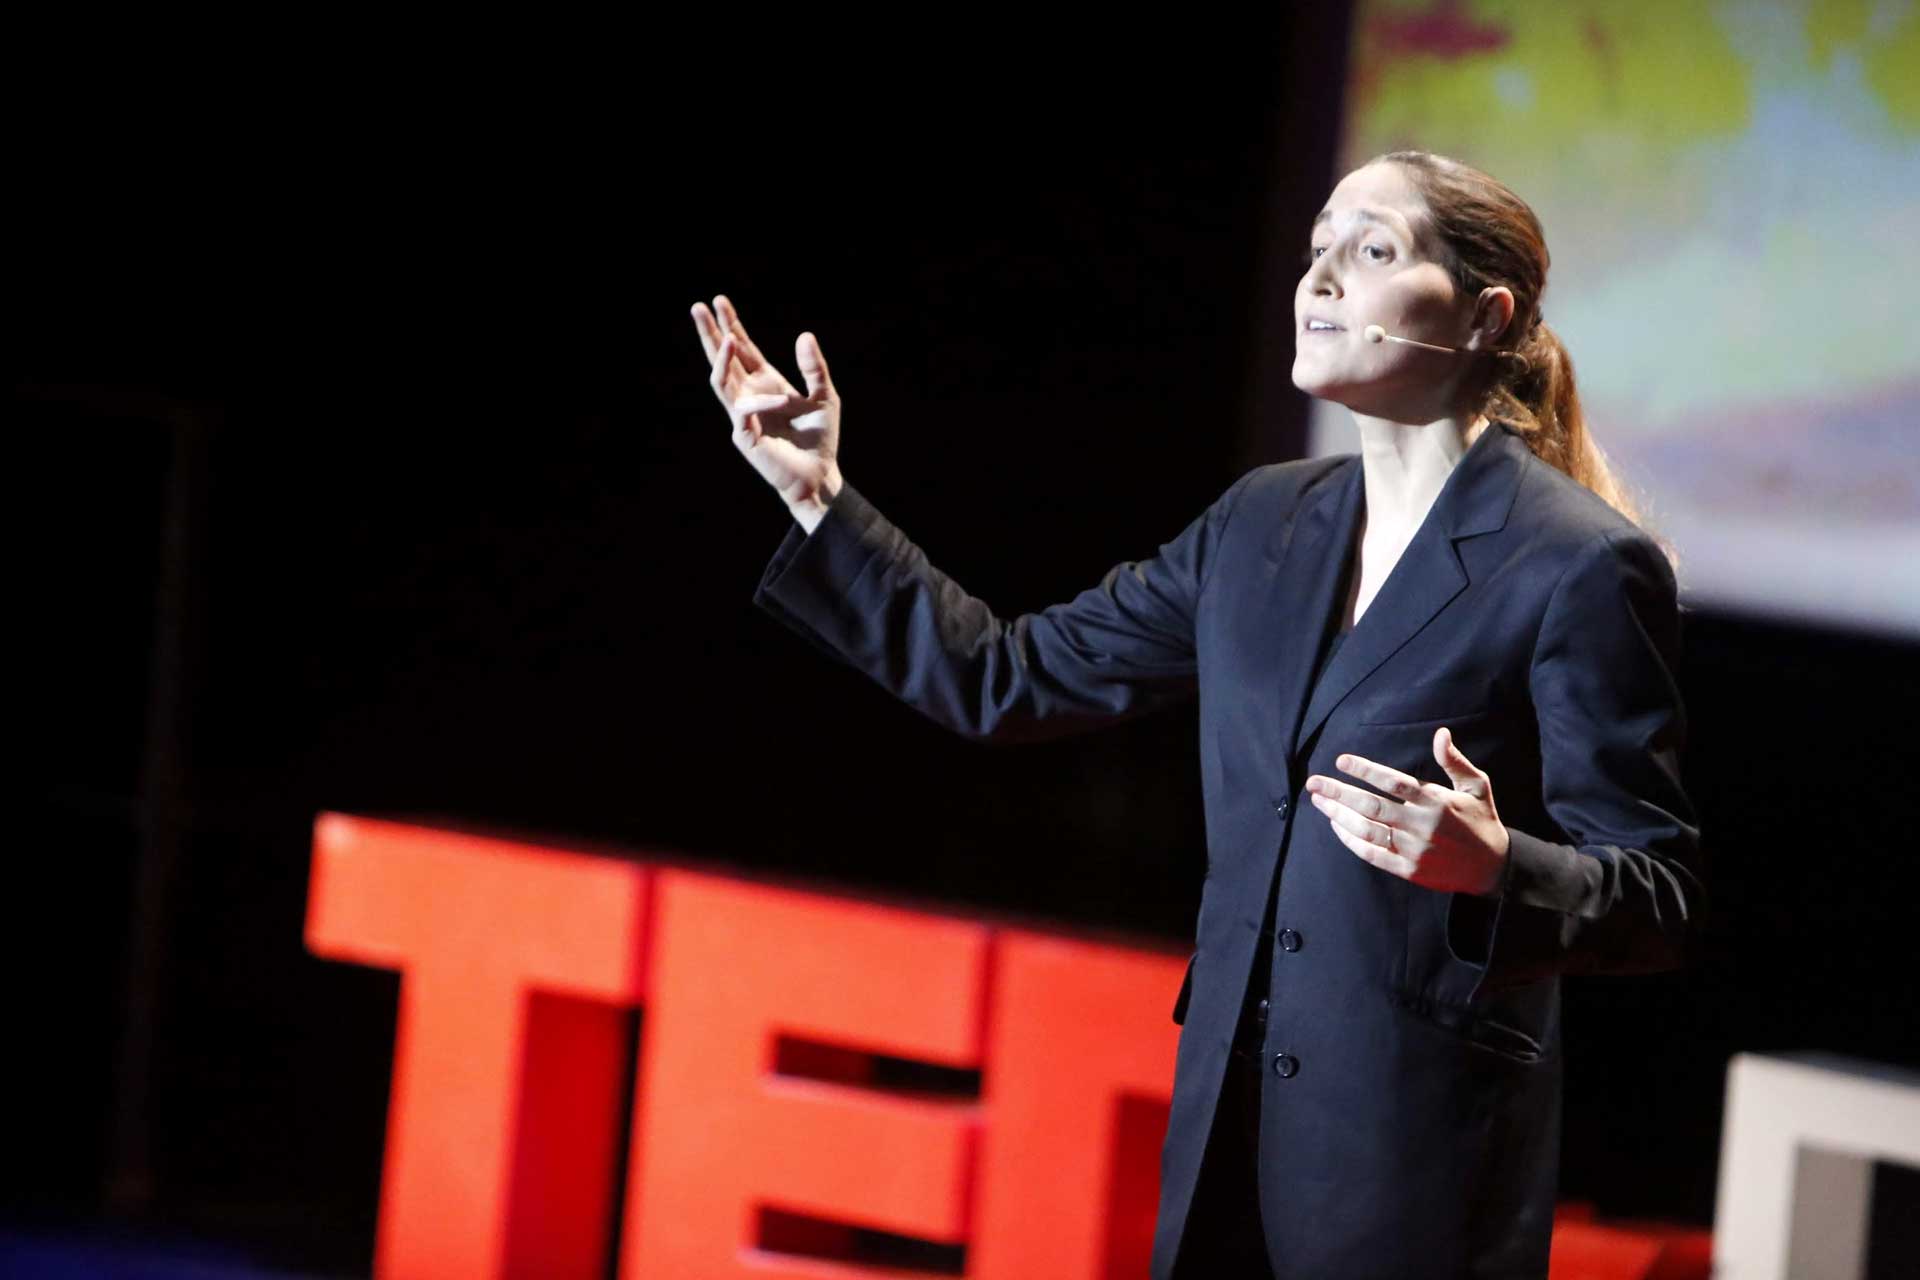 conference-TEDxParis-2013-9.jpg